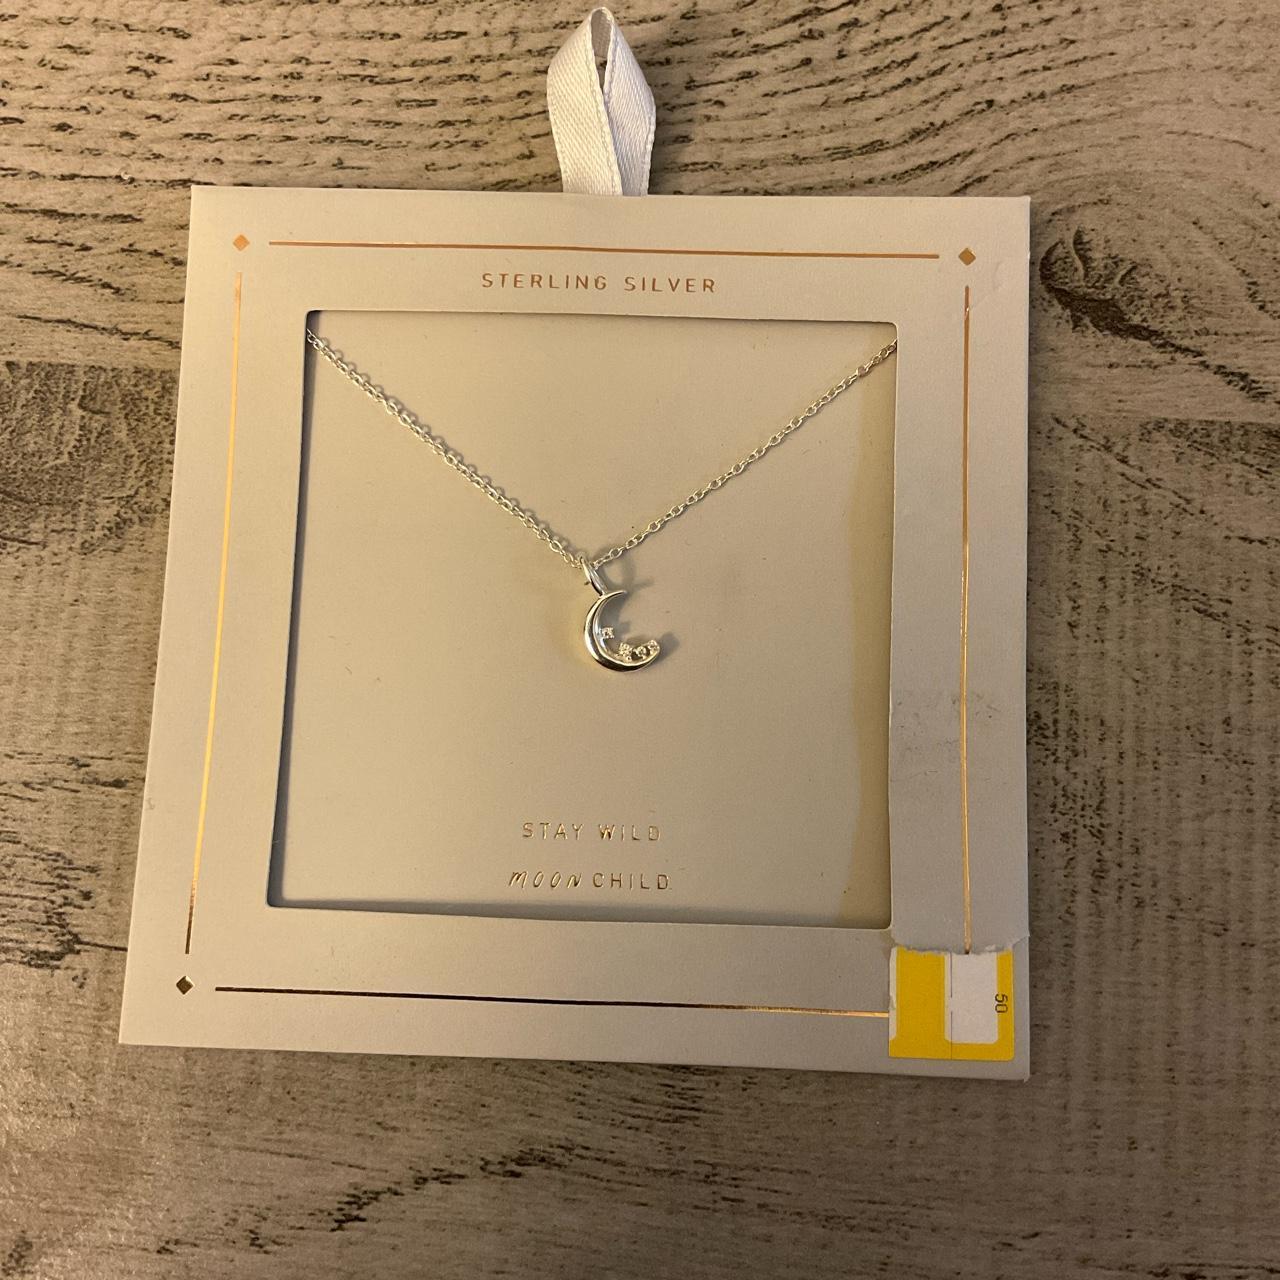 Sterling Silver Moon Child Necklace Brand New... - Depop